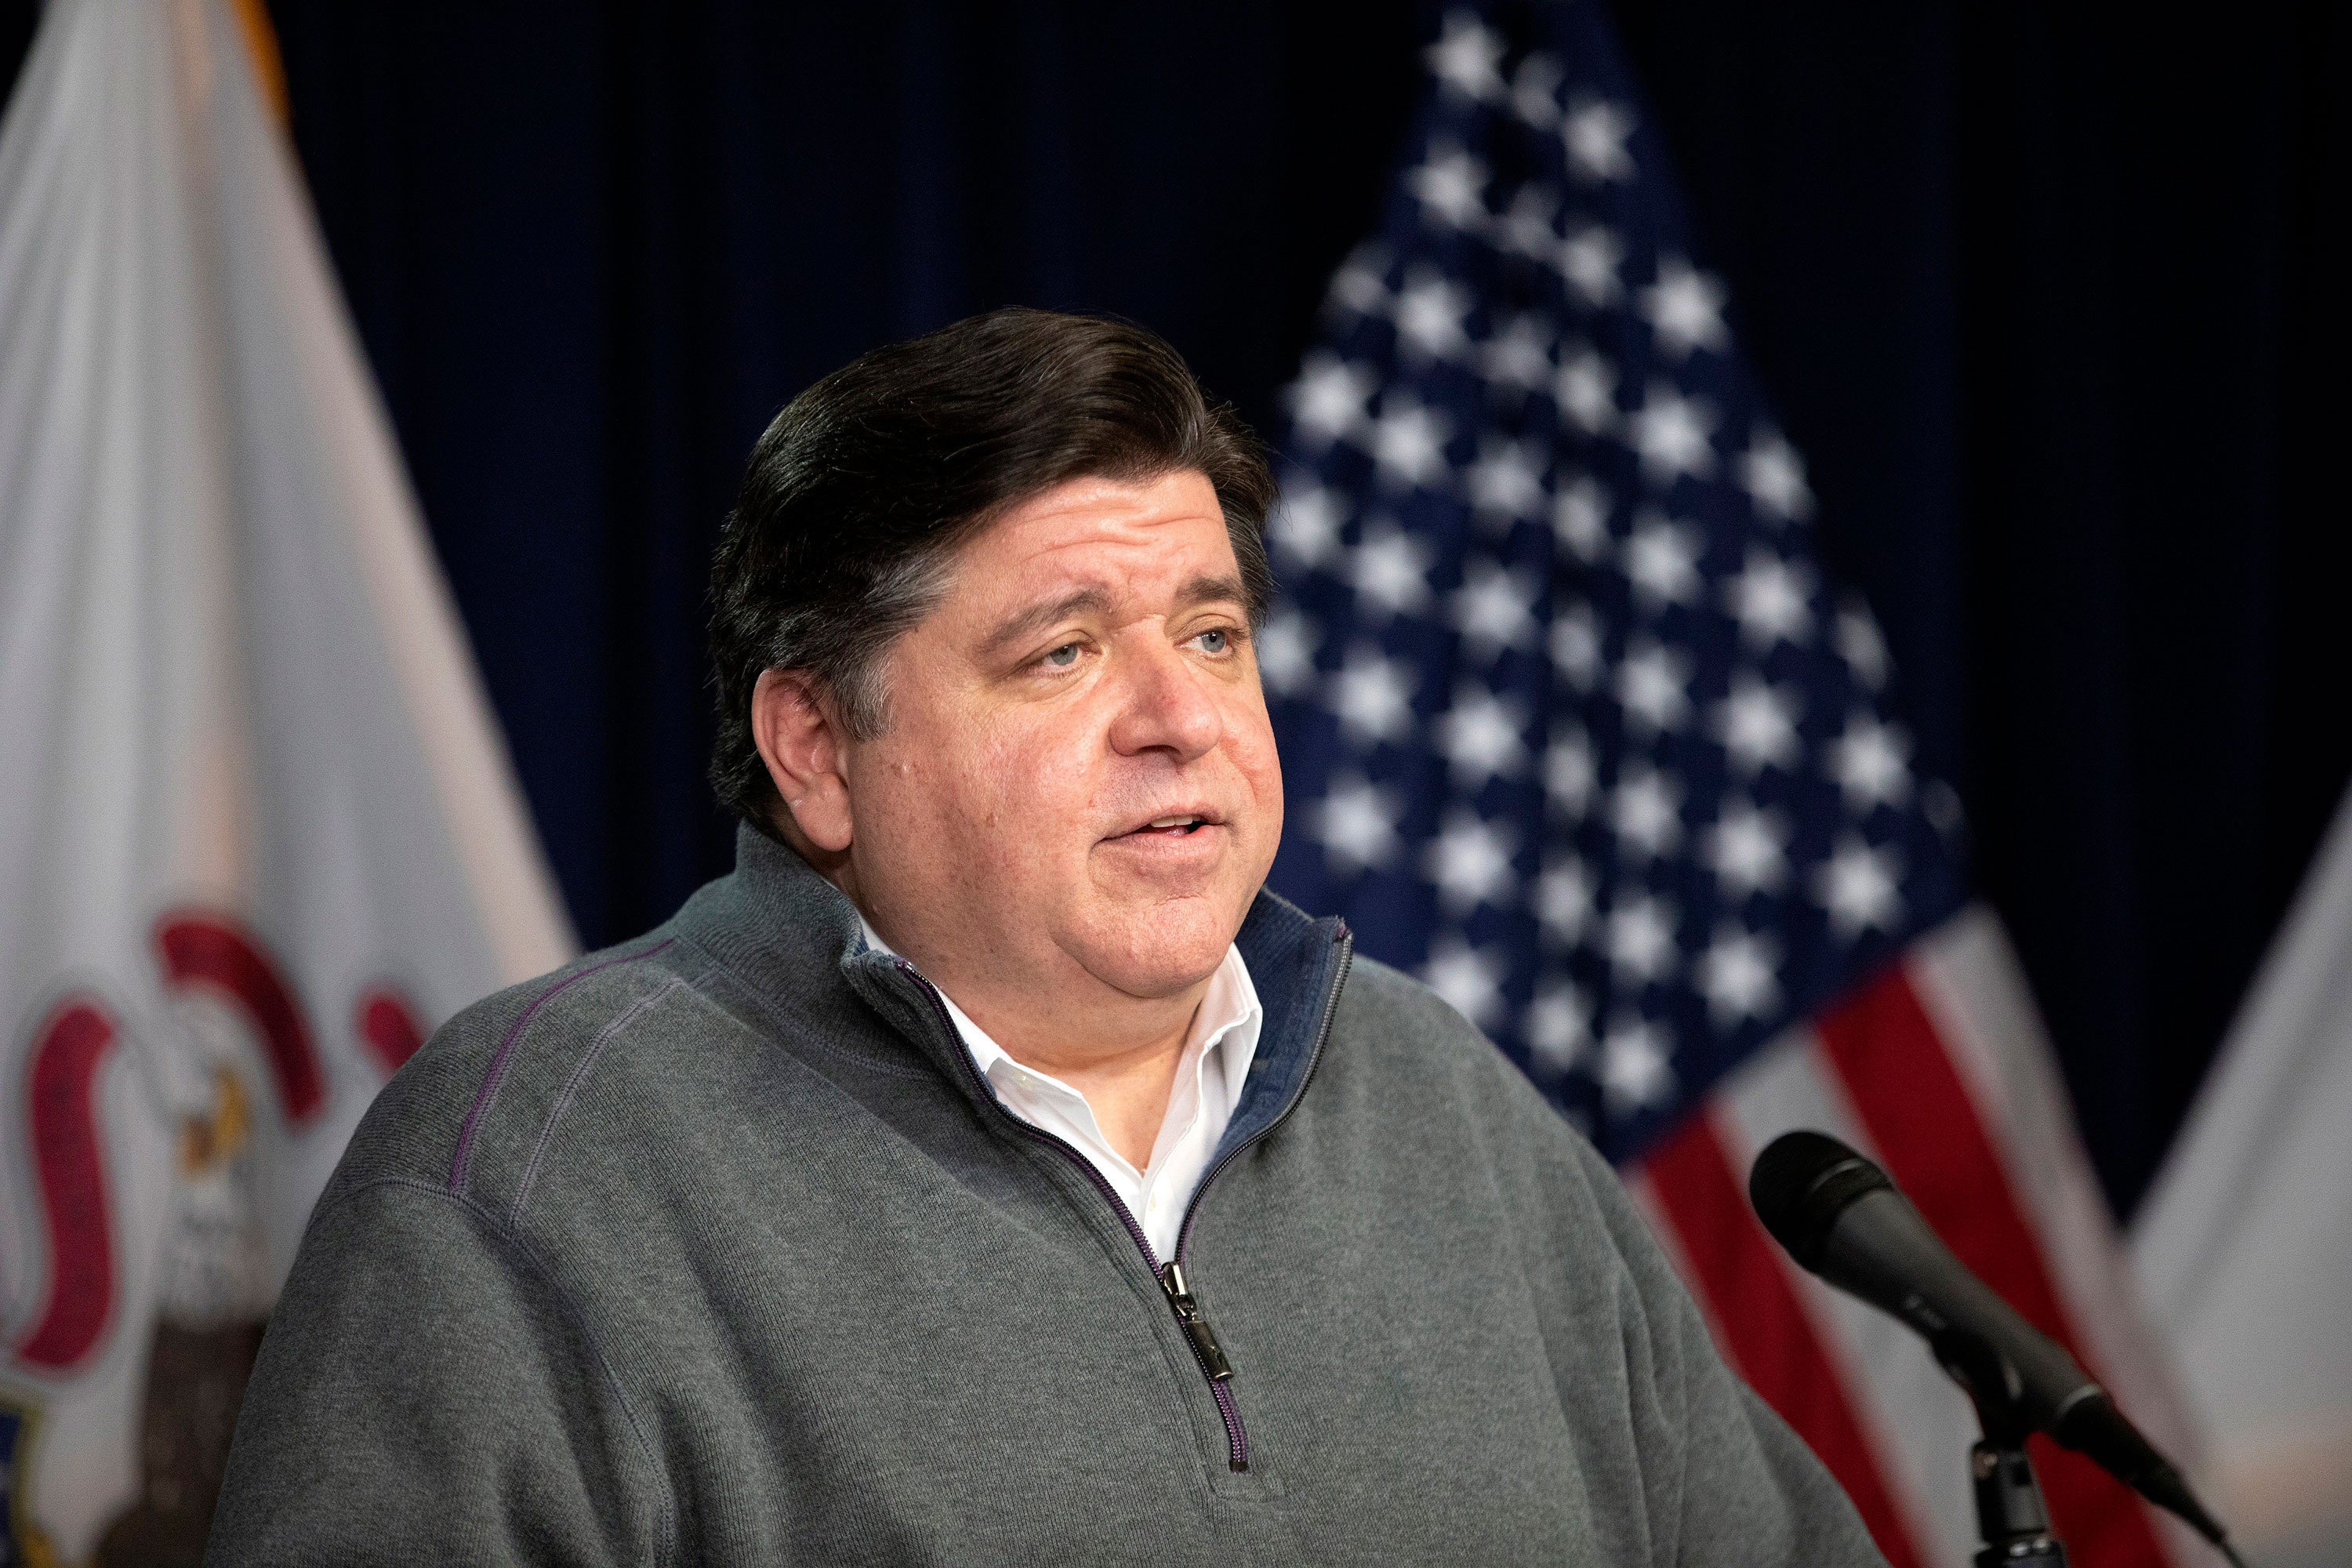 Illinois Gov. J.B. Pritzker speaks at a press briefing on May 3 in Chicago.